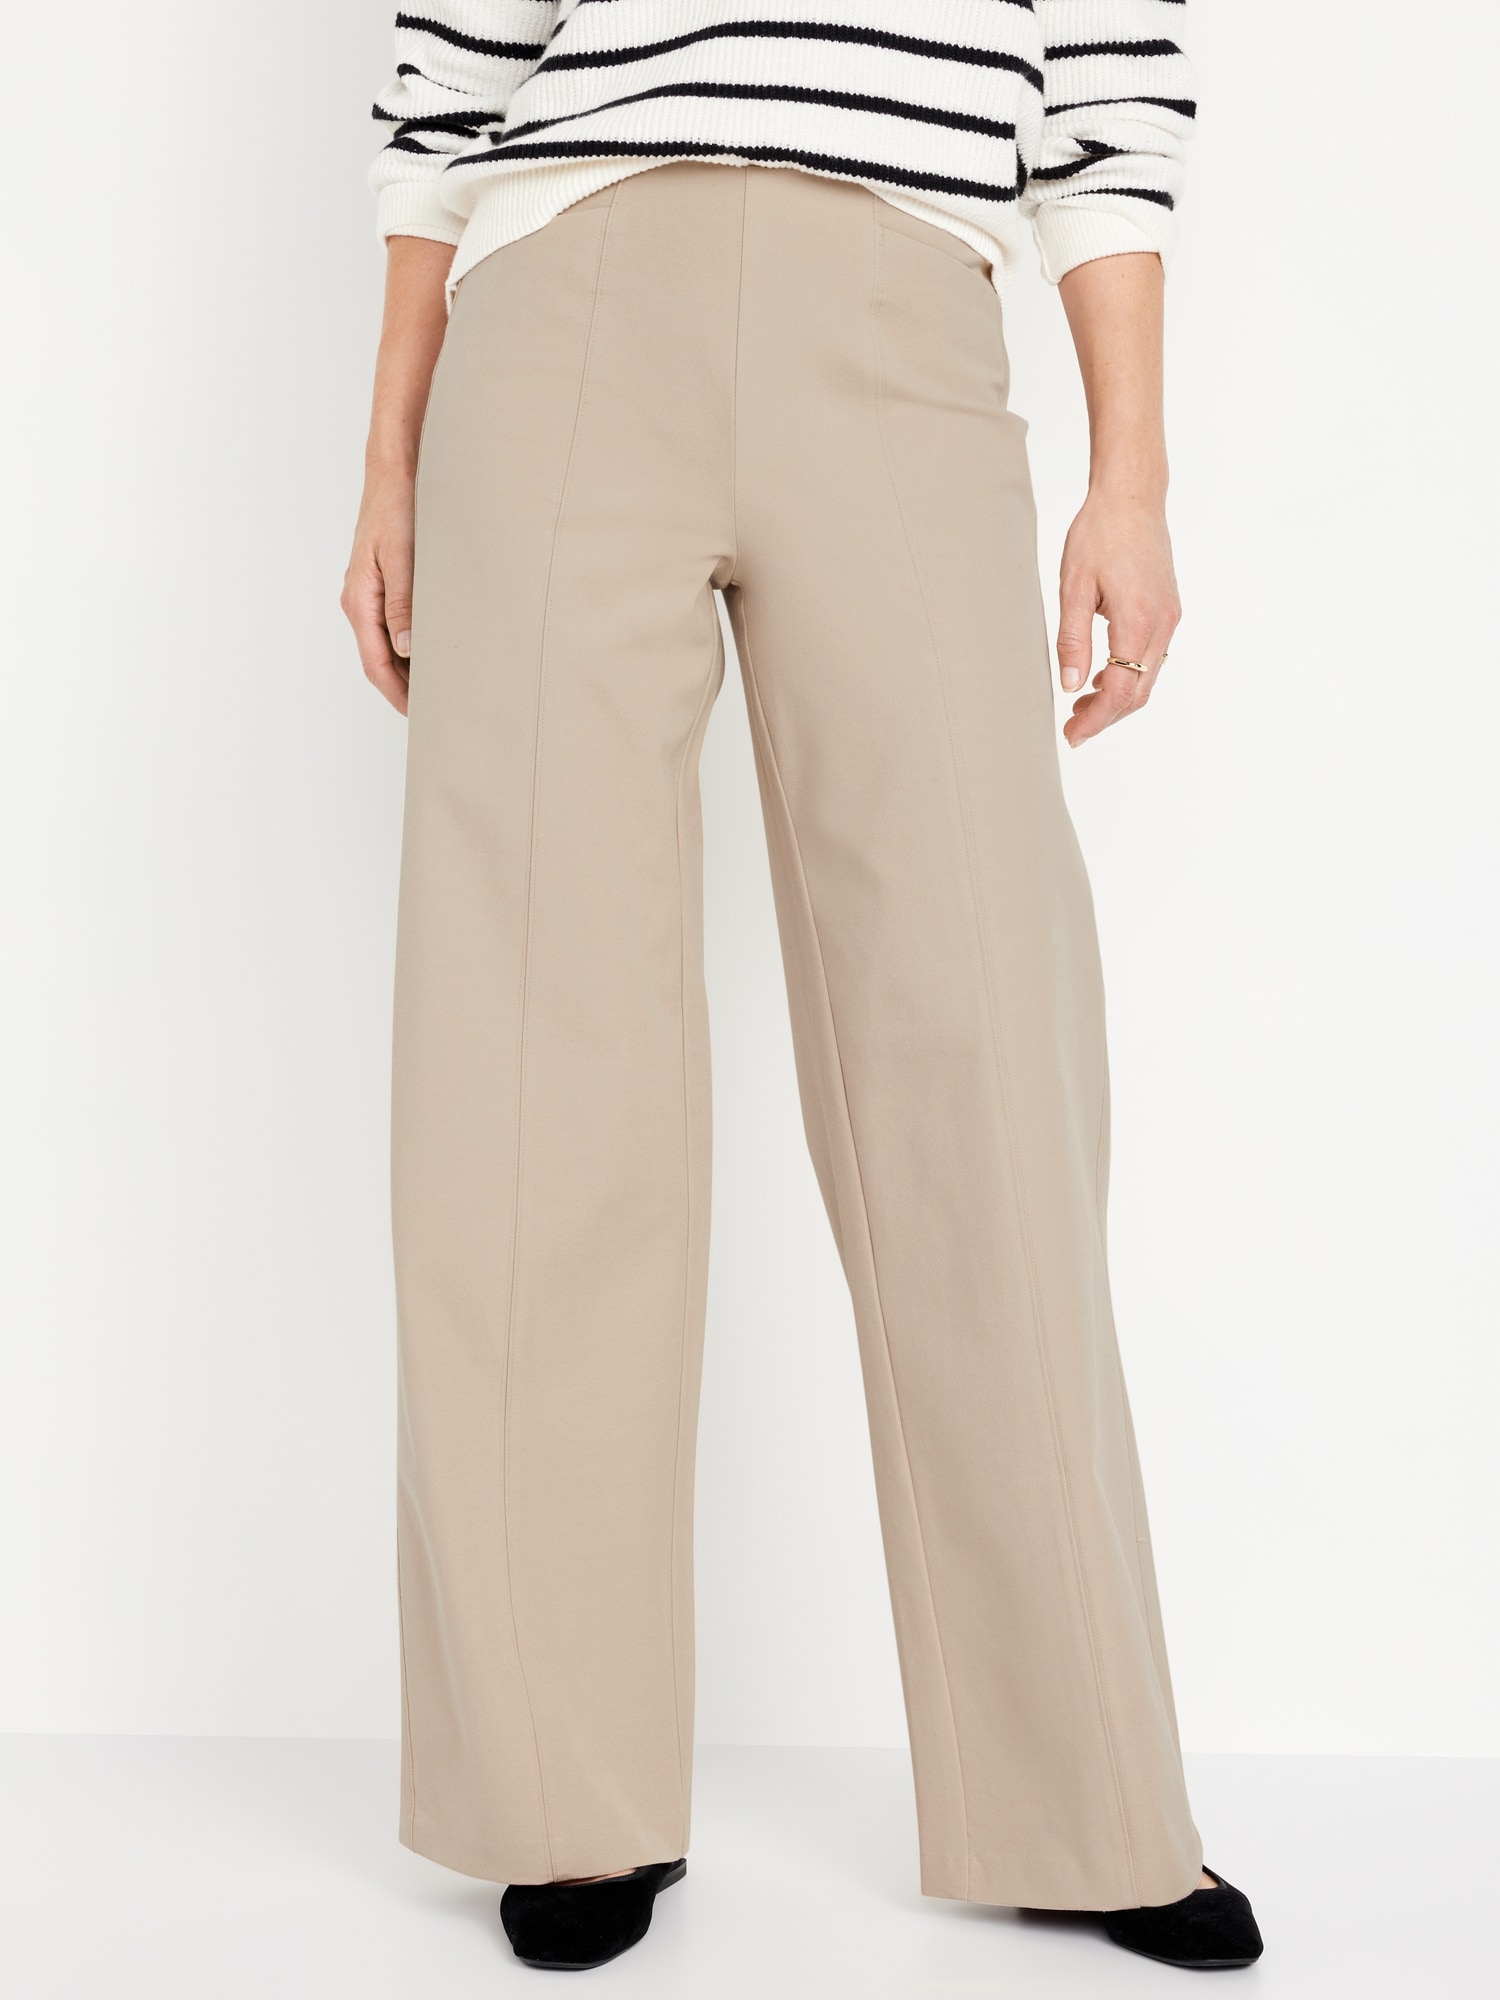 Up To 41% Off on Women's Flared Pants Shirred